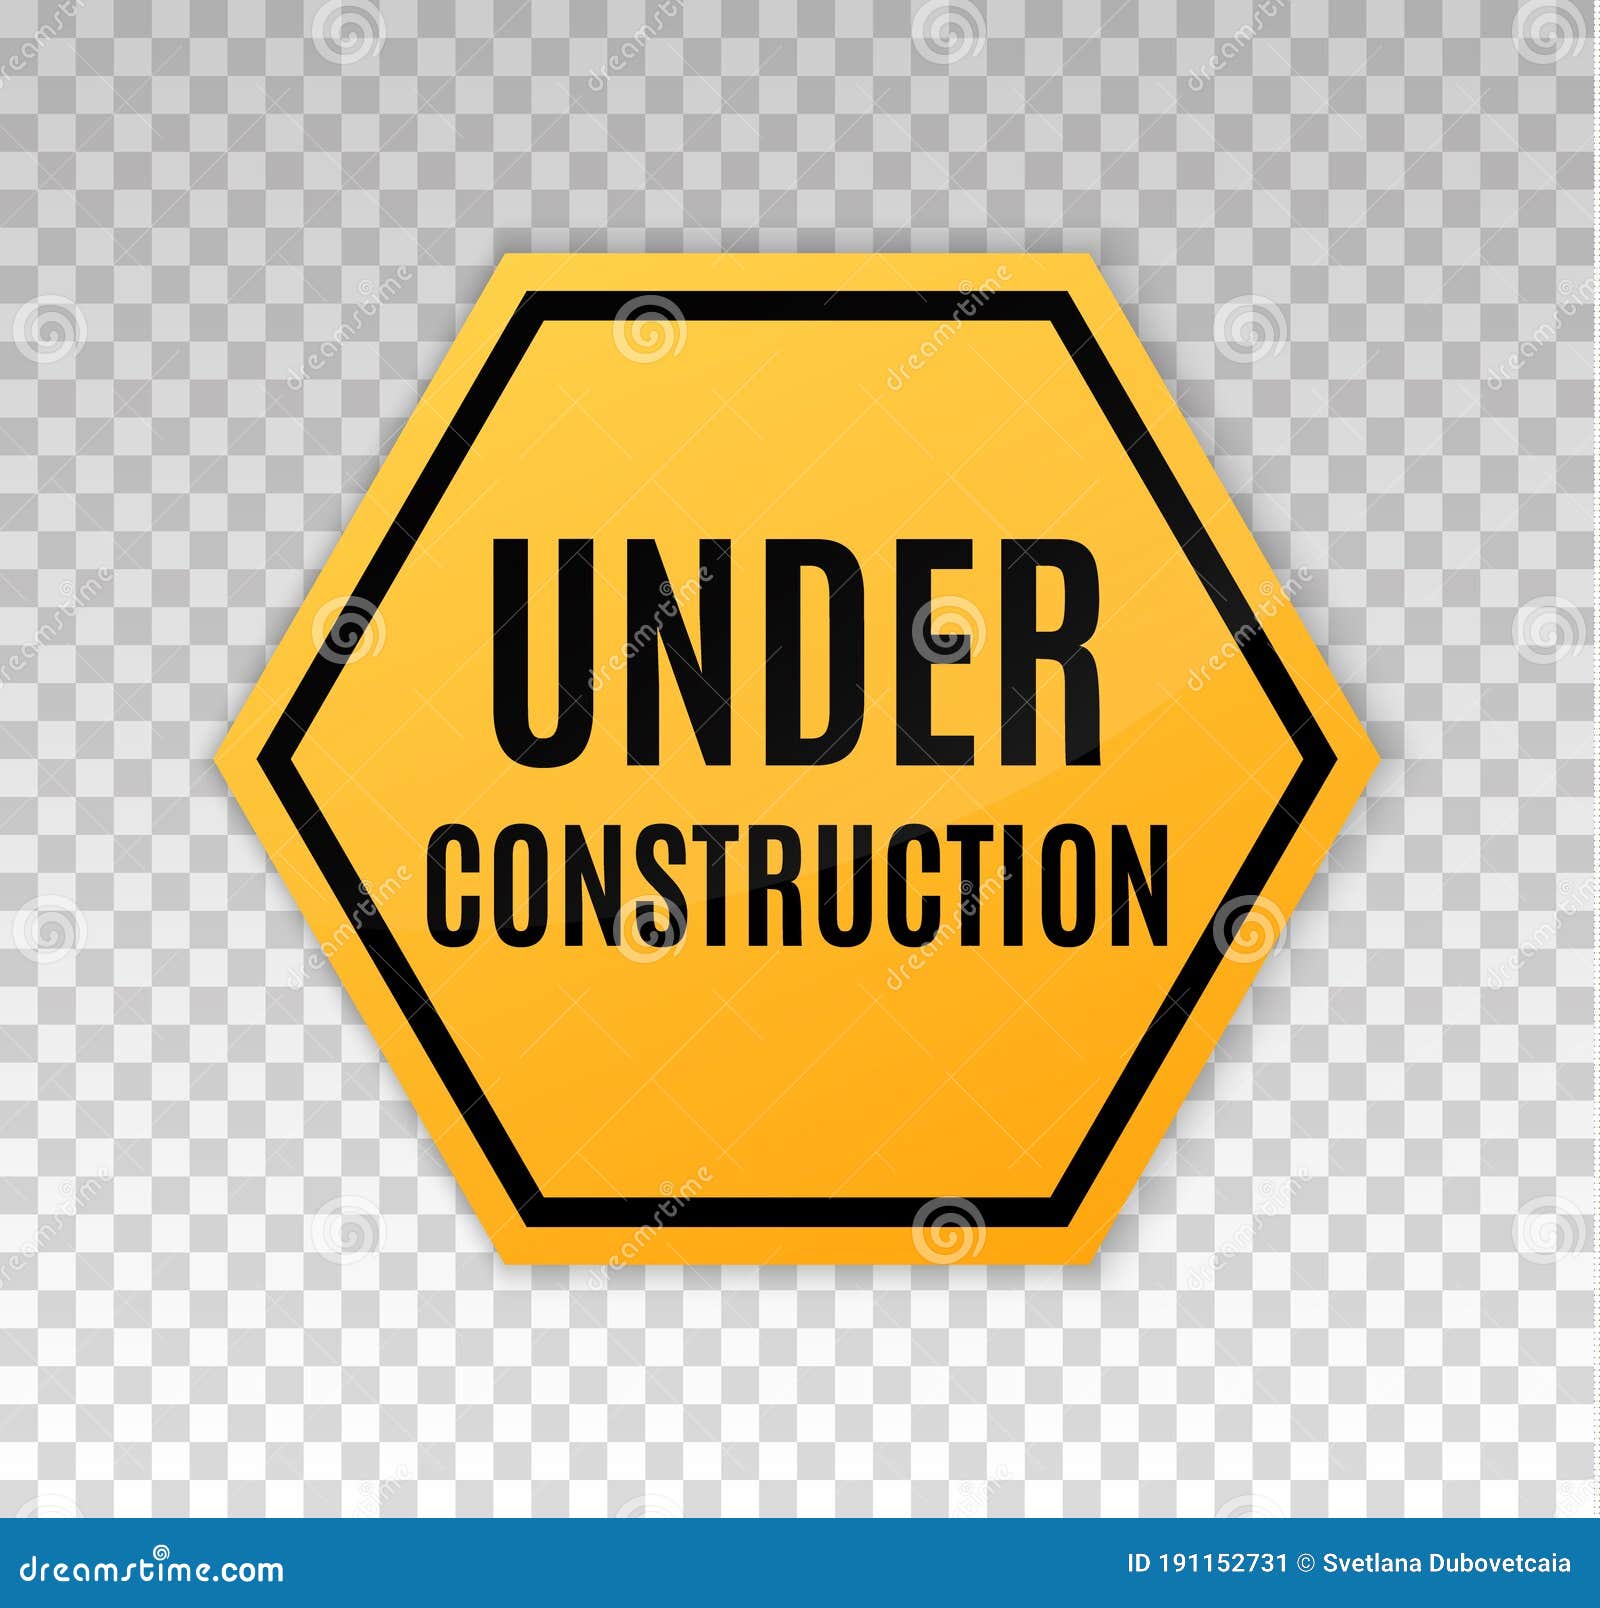 under construction sign. construct banner. icon under construction. signage danger. warning caution. yellow board attract attentio